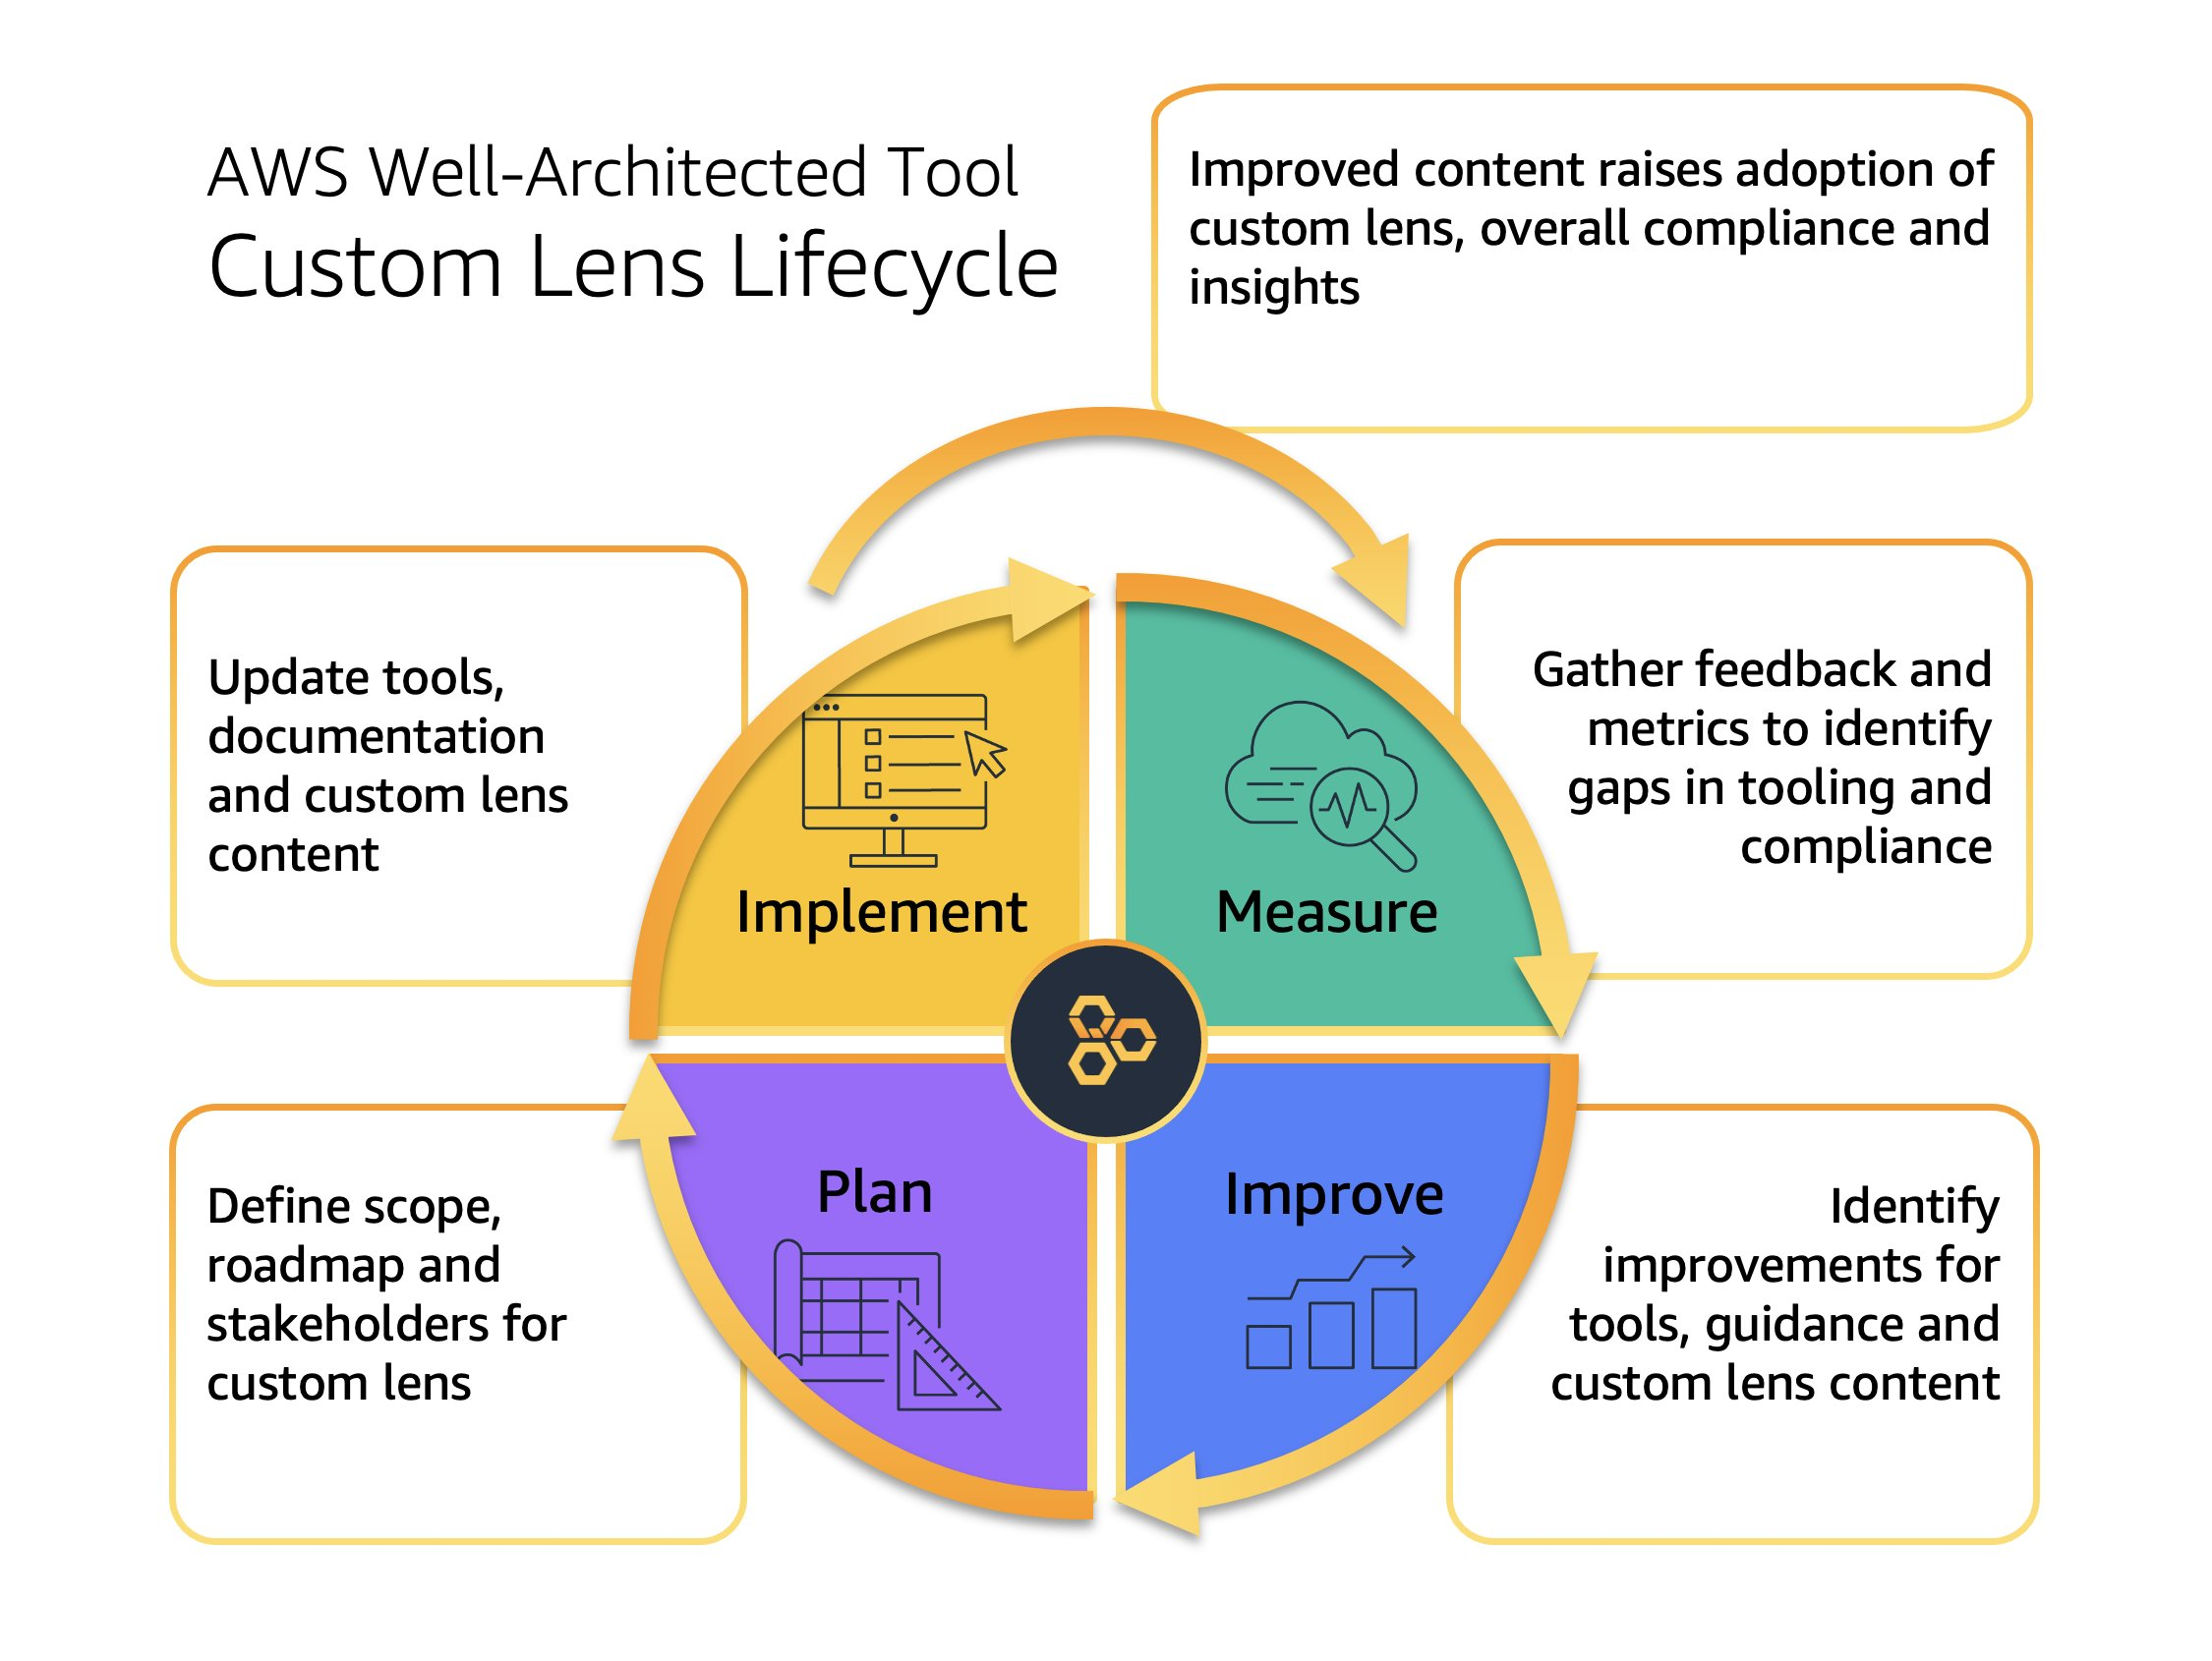 Figure 1. The AWS Well-Architected Custom Lens lifecycle